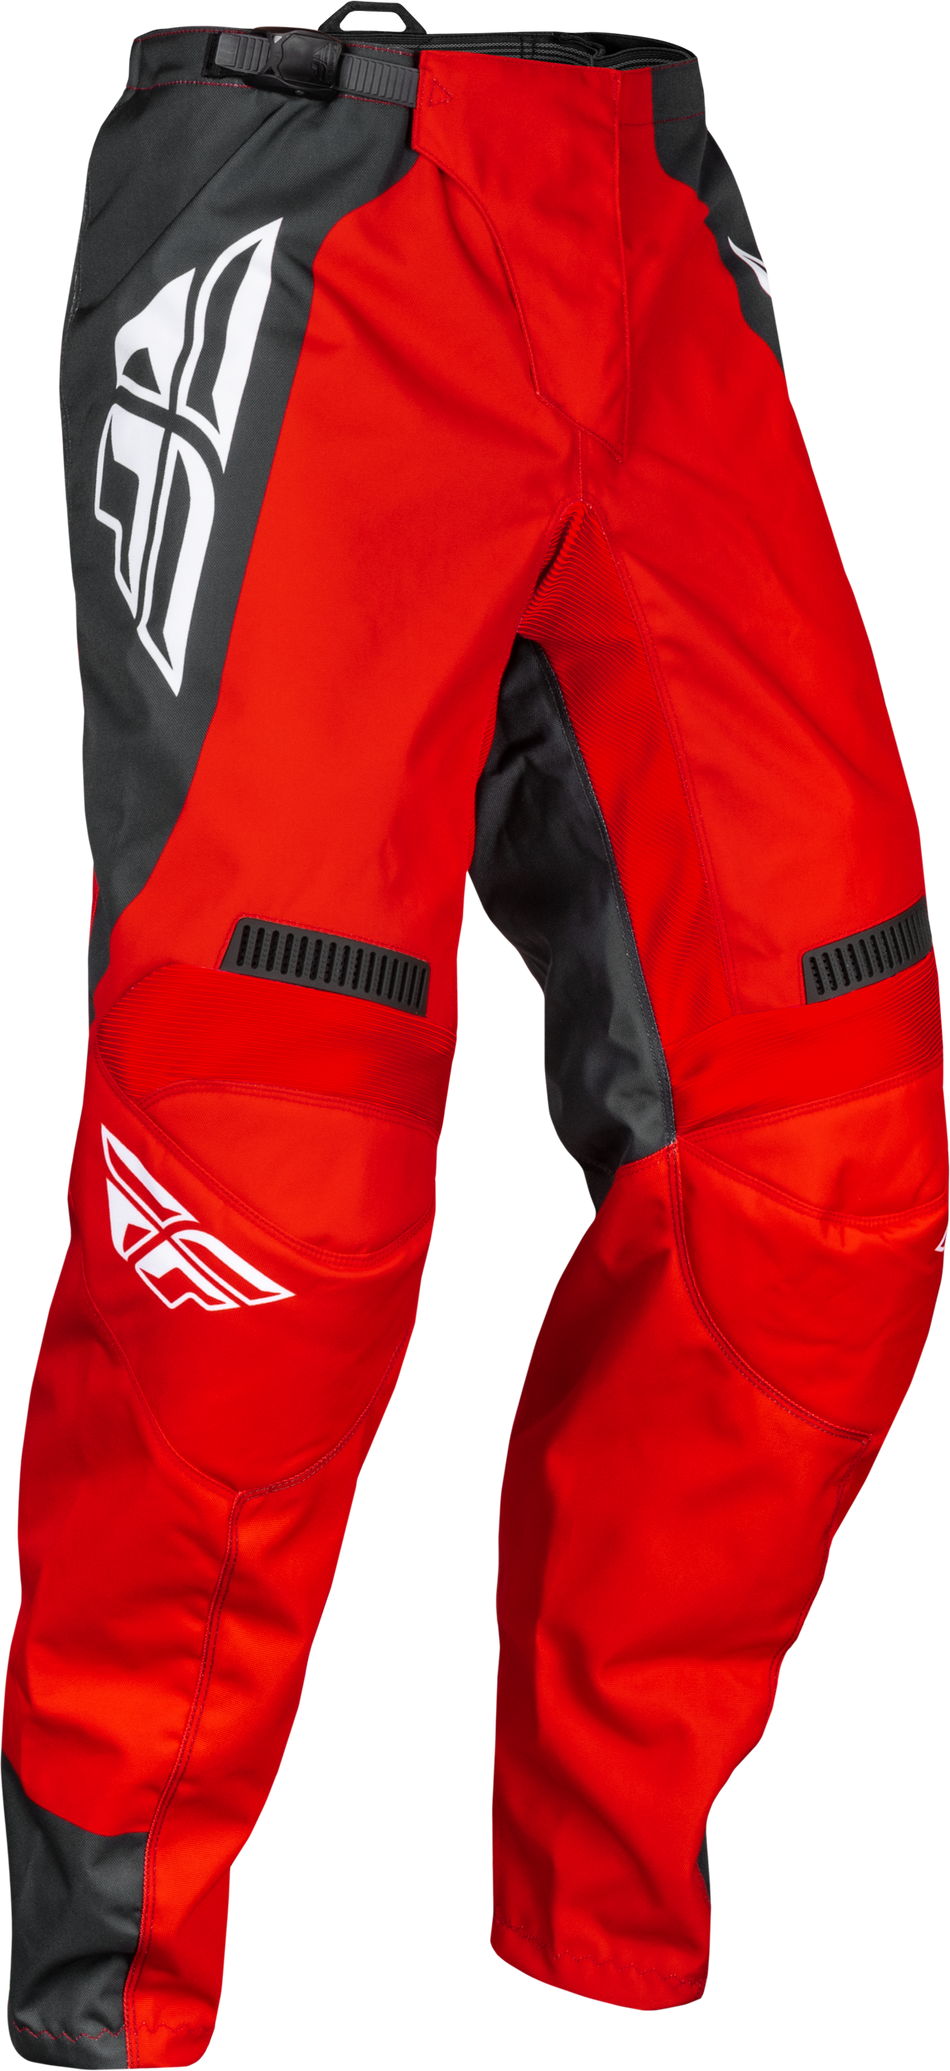 FLY RACING F-16 Pants Red/Charcoal/White Sz 34 377-93334